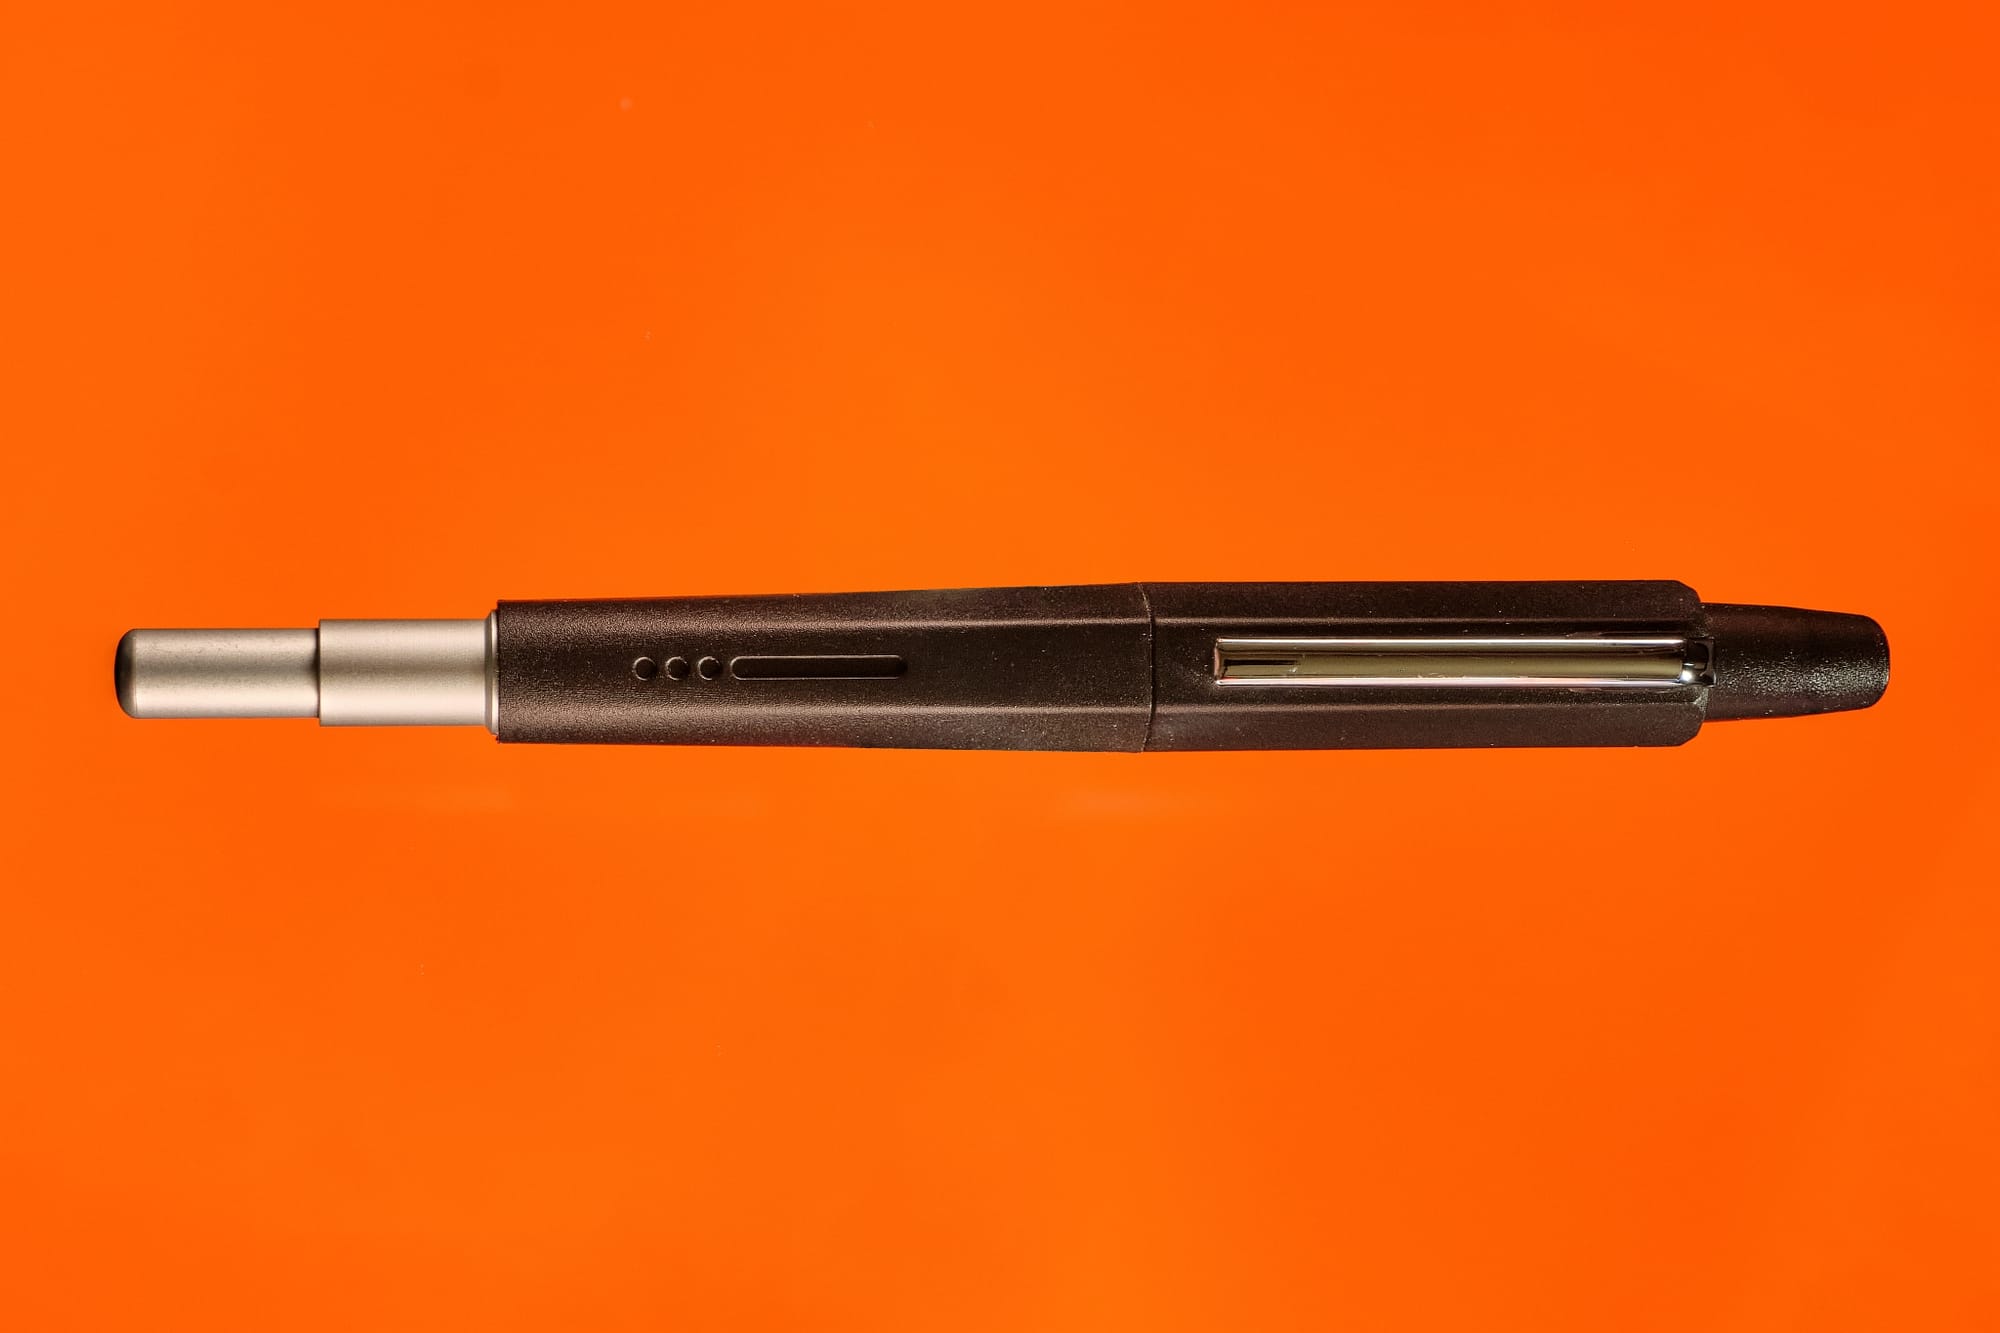 Photo of the Endless Creator retractable fountain pen on an orange background